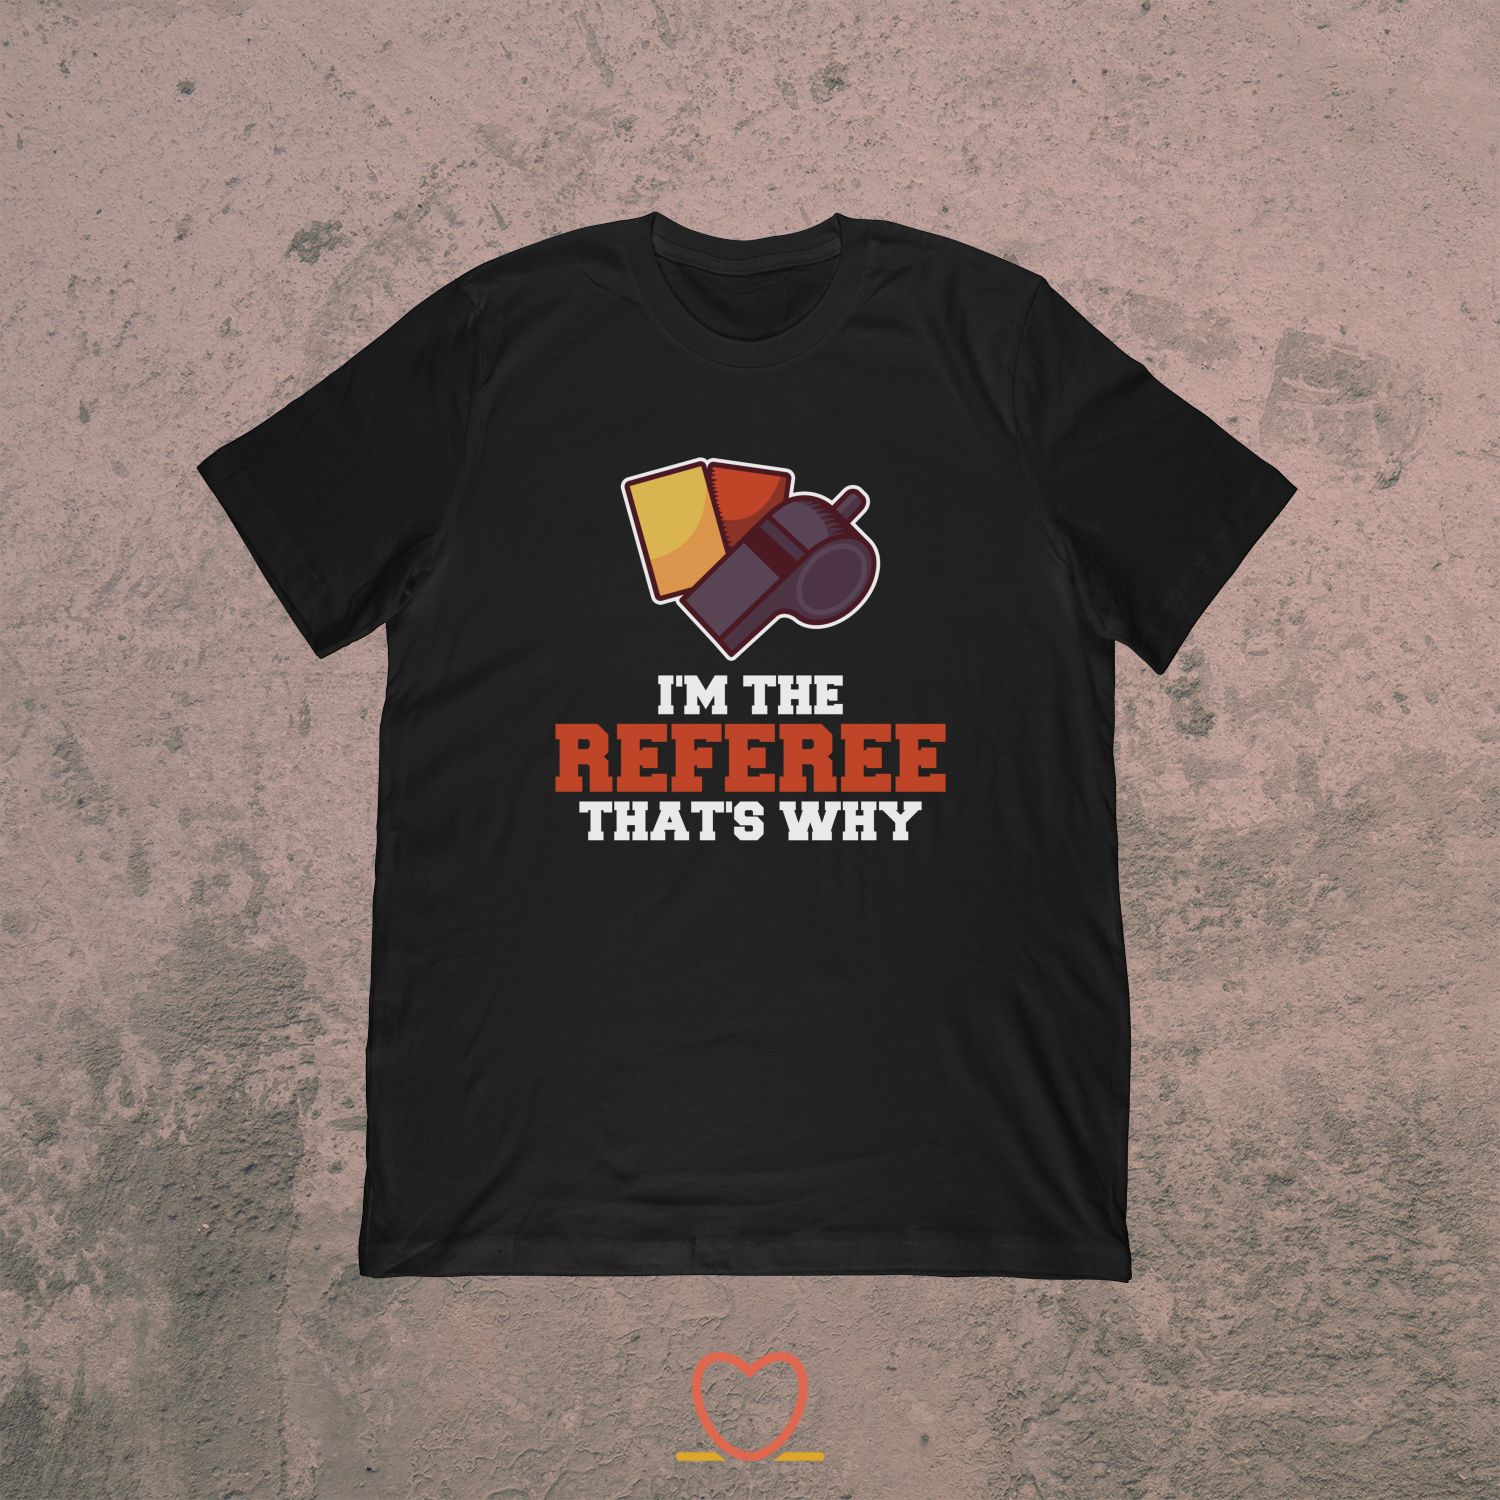 I’m The Referee That’s Why – Soccer Referee Tee